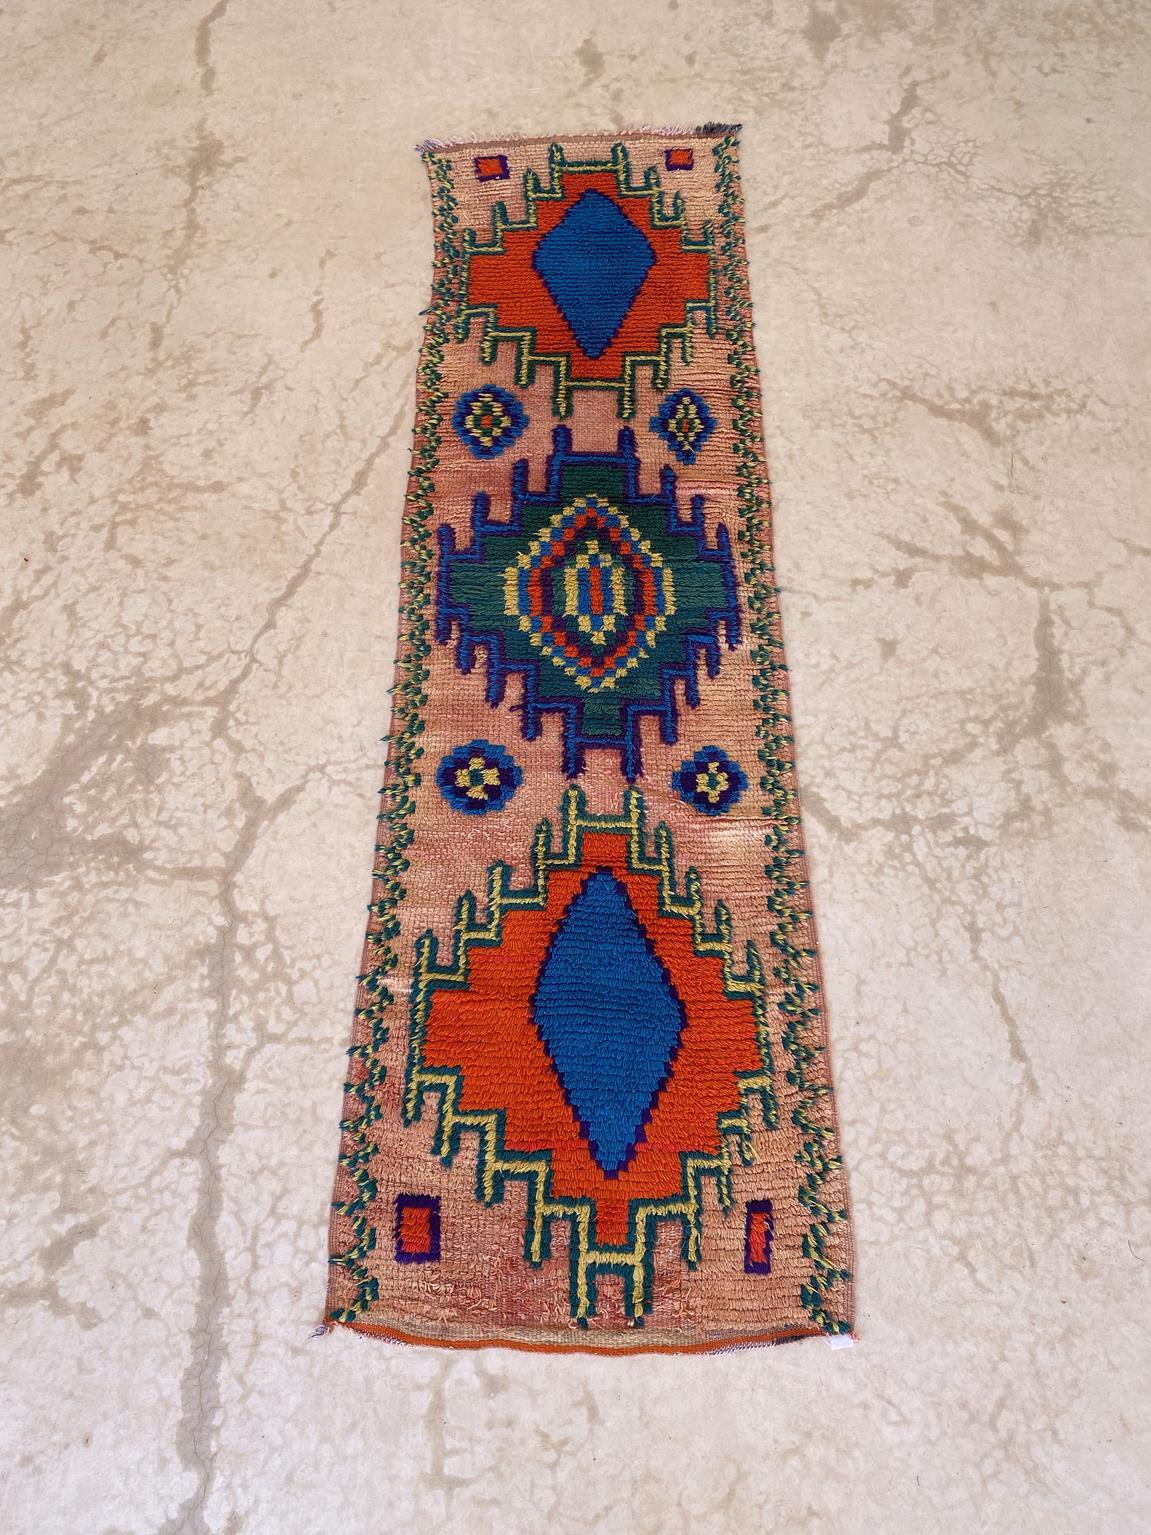 This lovely vintage Boujad runner rug just makes me happy! It shows such joyful colors and a classic, symetrical pattern with its 3 traditional hooked diamonds.

The dimensions of the rug make it a versatile rug you can put everywhere in the house,